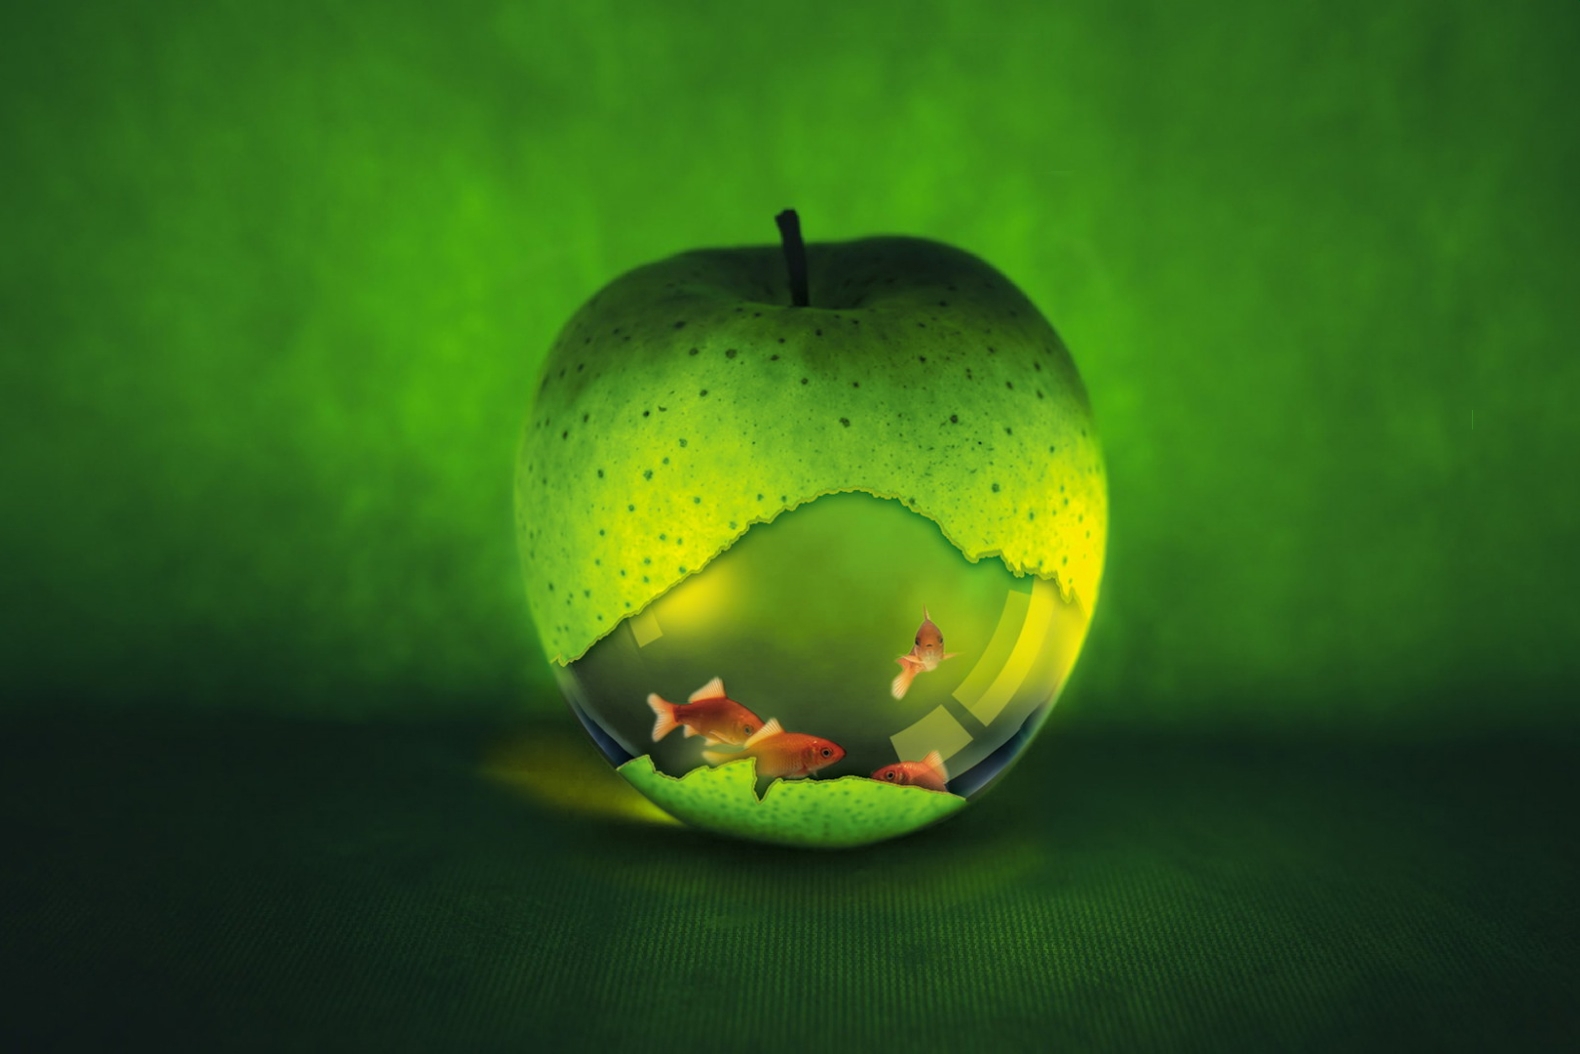 Surreal underwater scene with floating apple and fish.